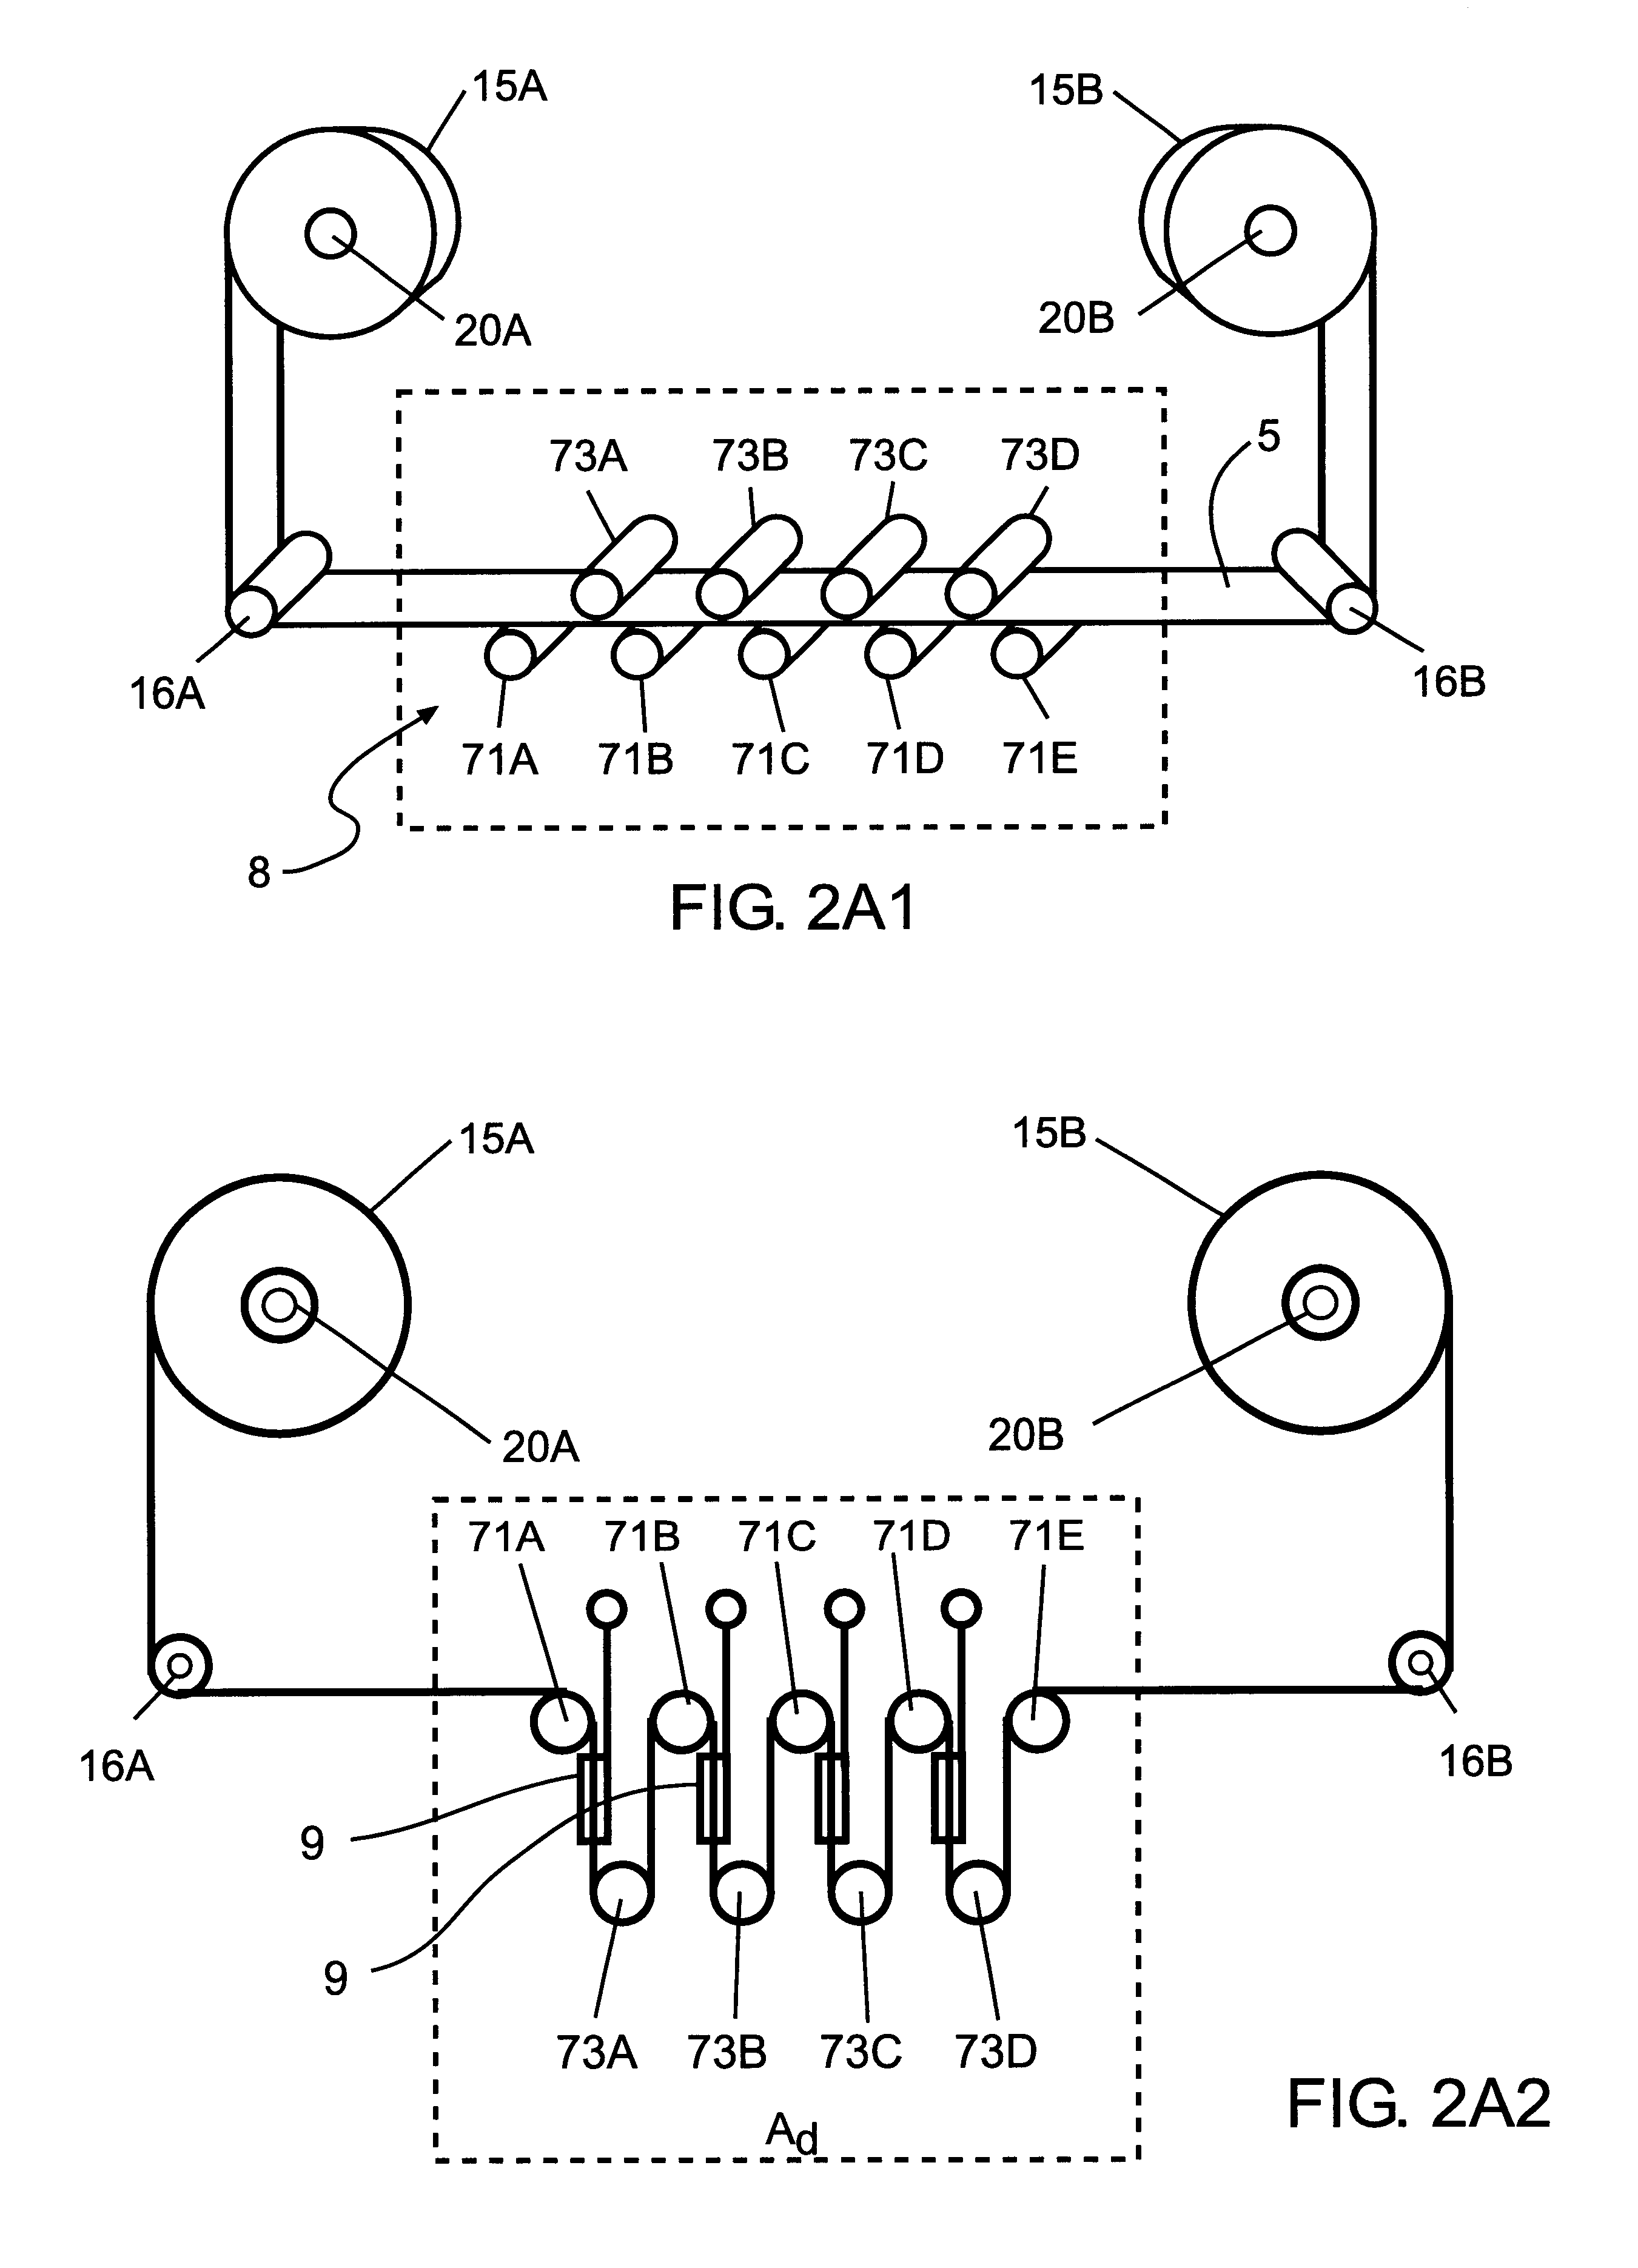 Metal-air fuel cell battery system having means for bi-directionally transporting metal-fuel tape and managing metal-fuel available therealong